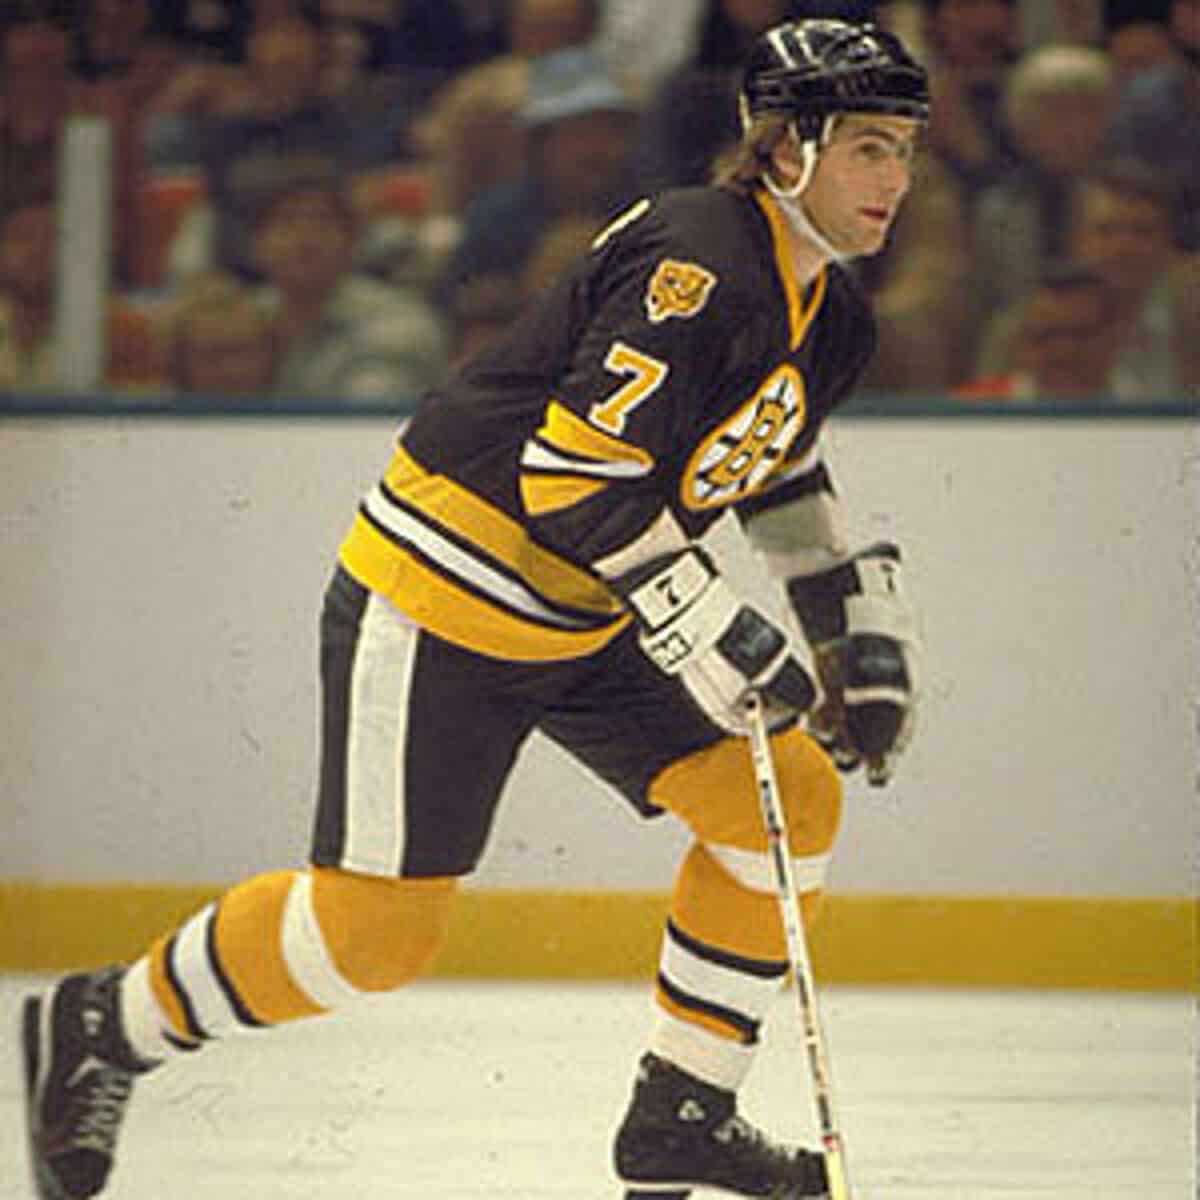 Ray Bourque - Famous Ice Hockey Player